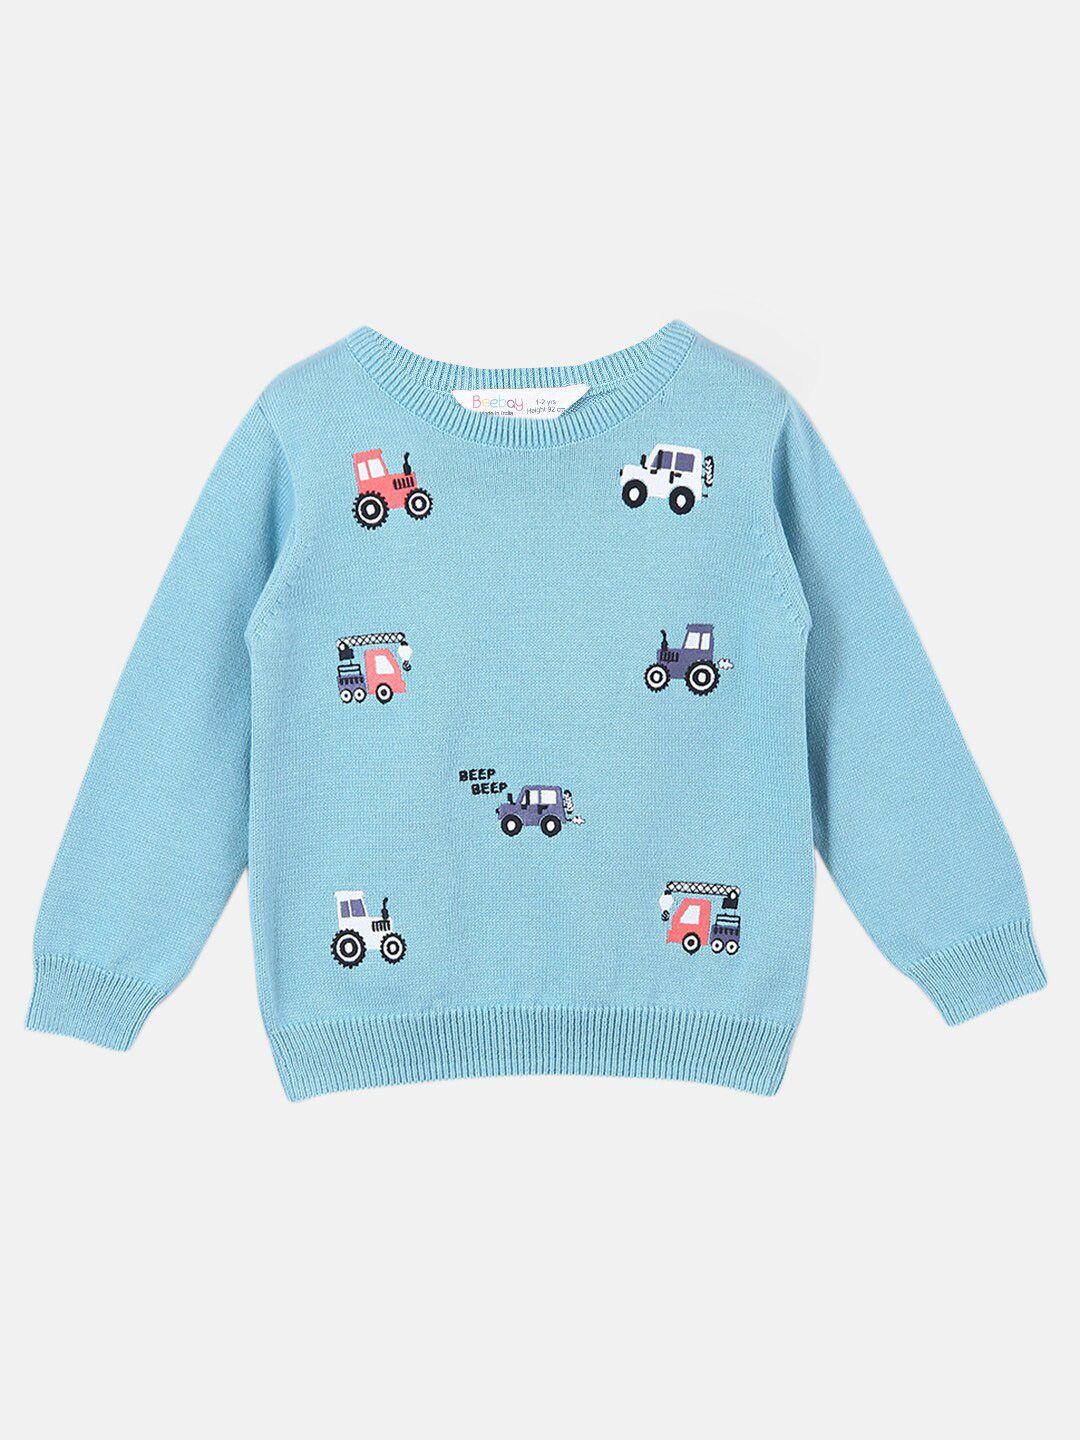 Beebay Boys Blue & White Embroidered Pullover Sweater